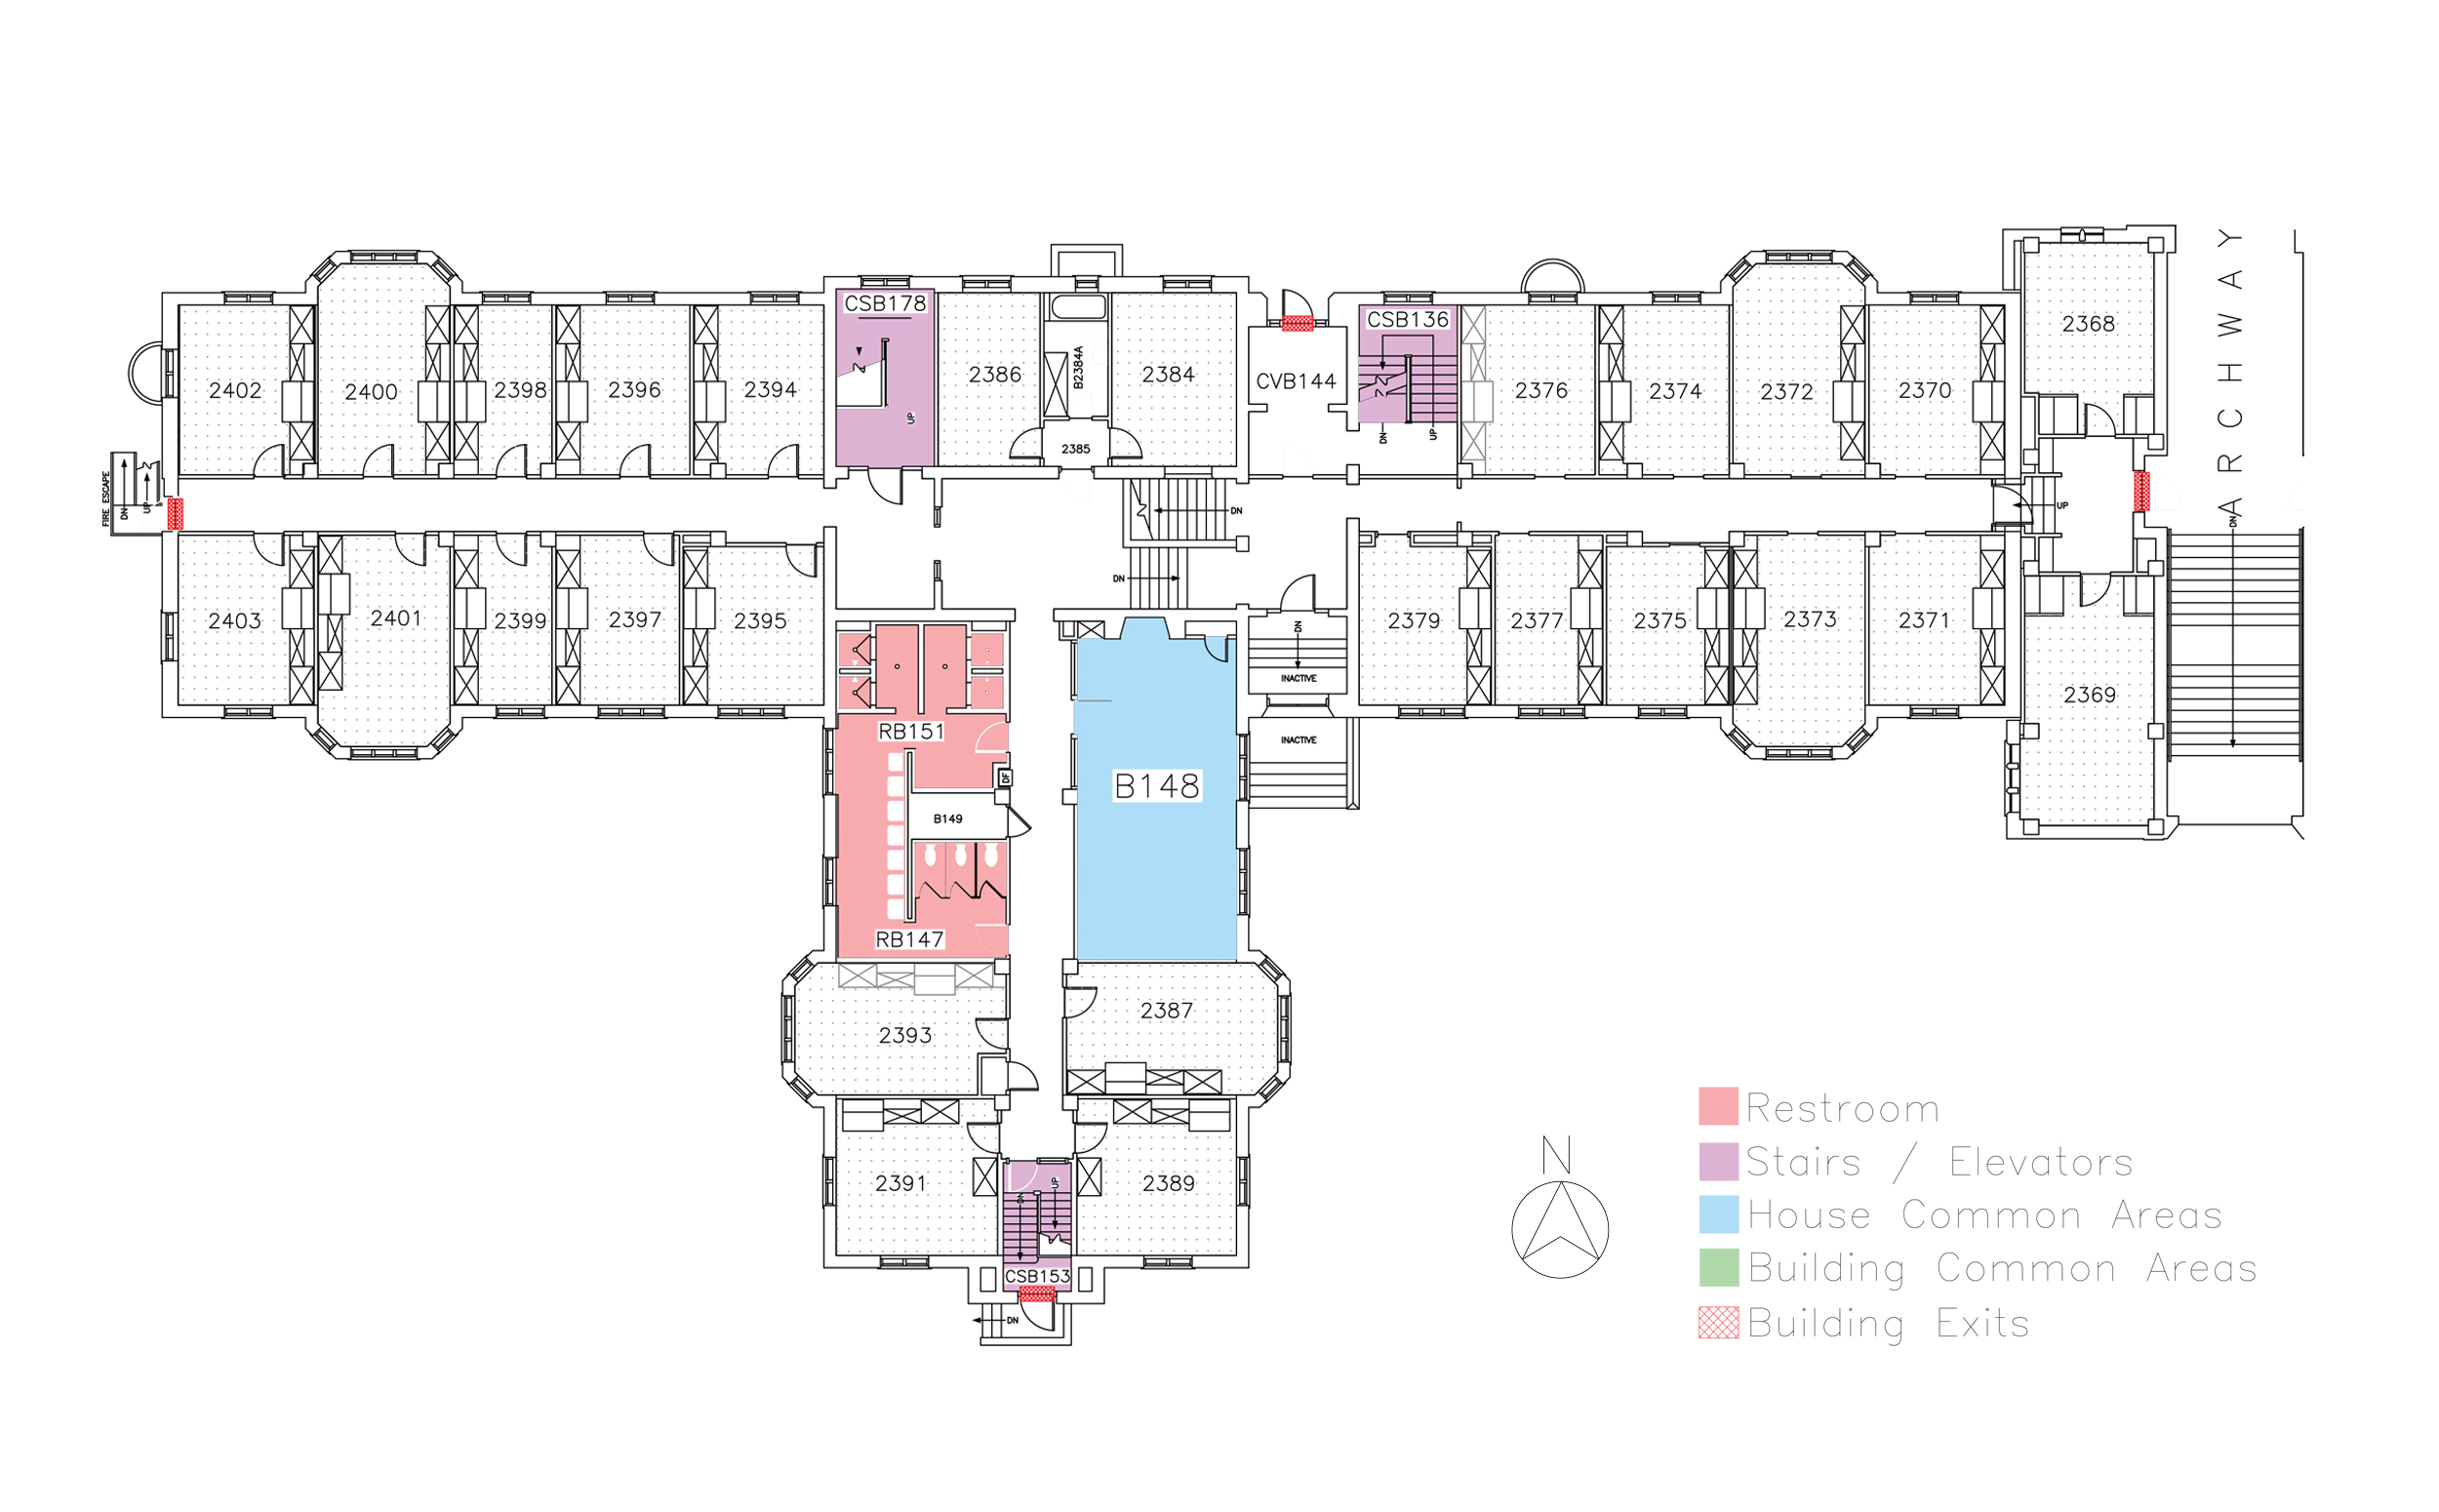 Hutton House, second floor in Friley Hall floor plan. Identifies the location of rooms, bathrooms and common space.